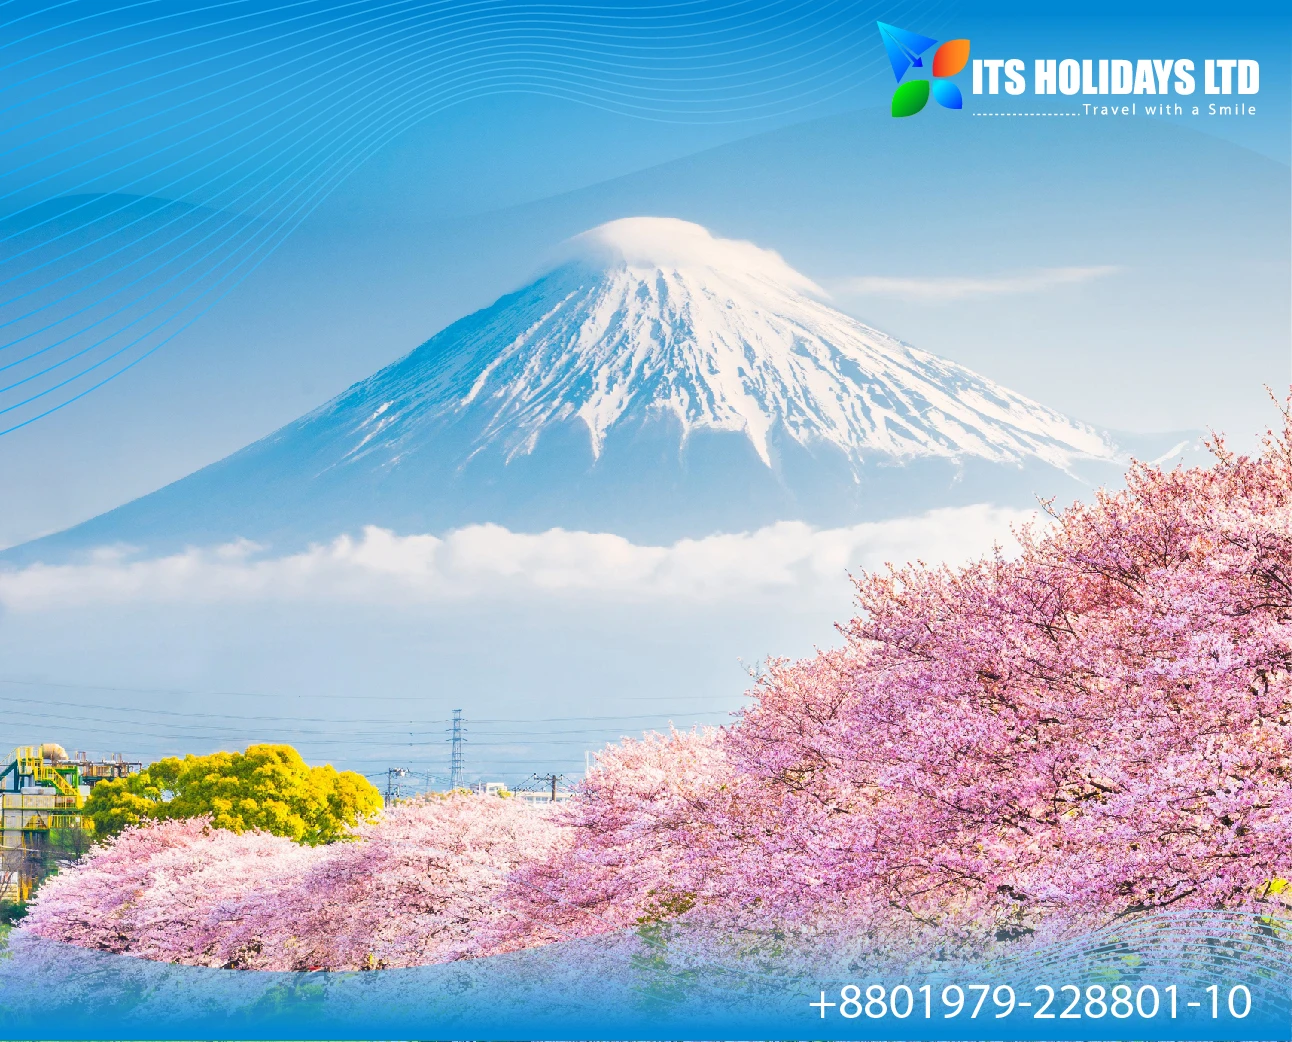 Tokyo & Kyoto Tour Package From Bangladesh